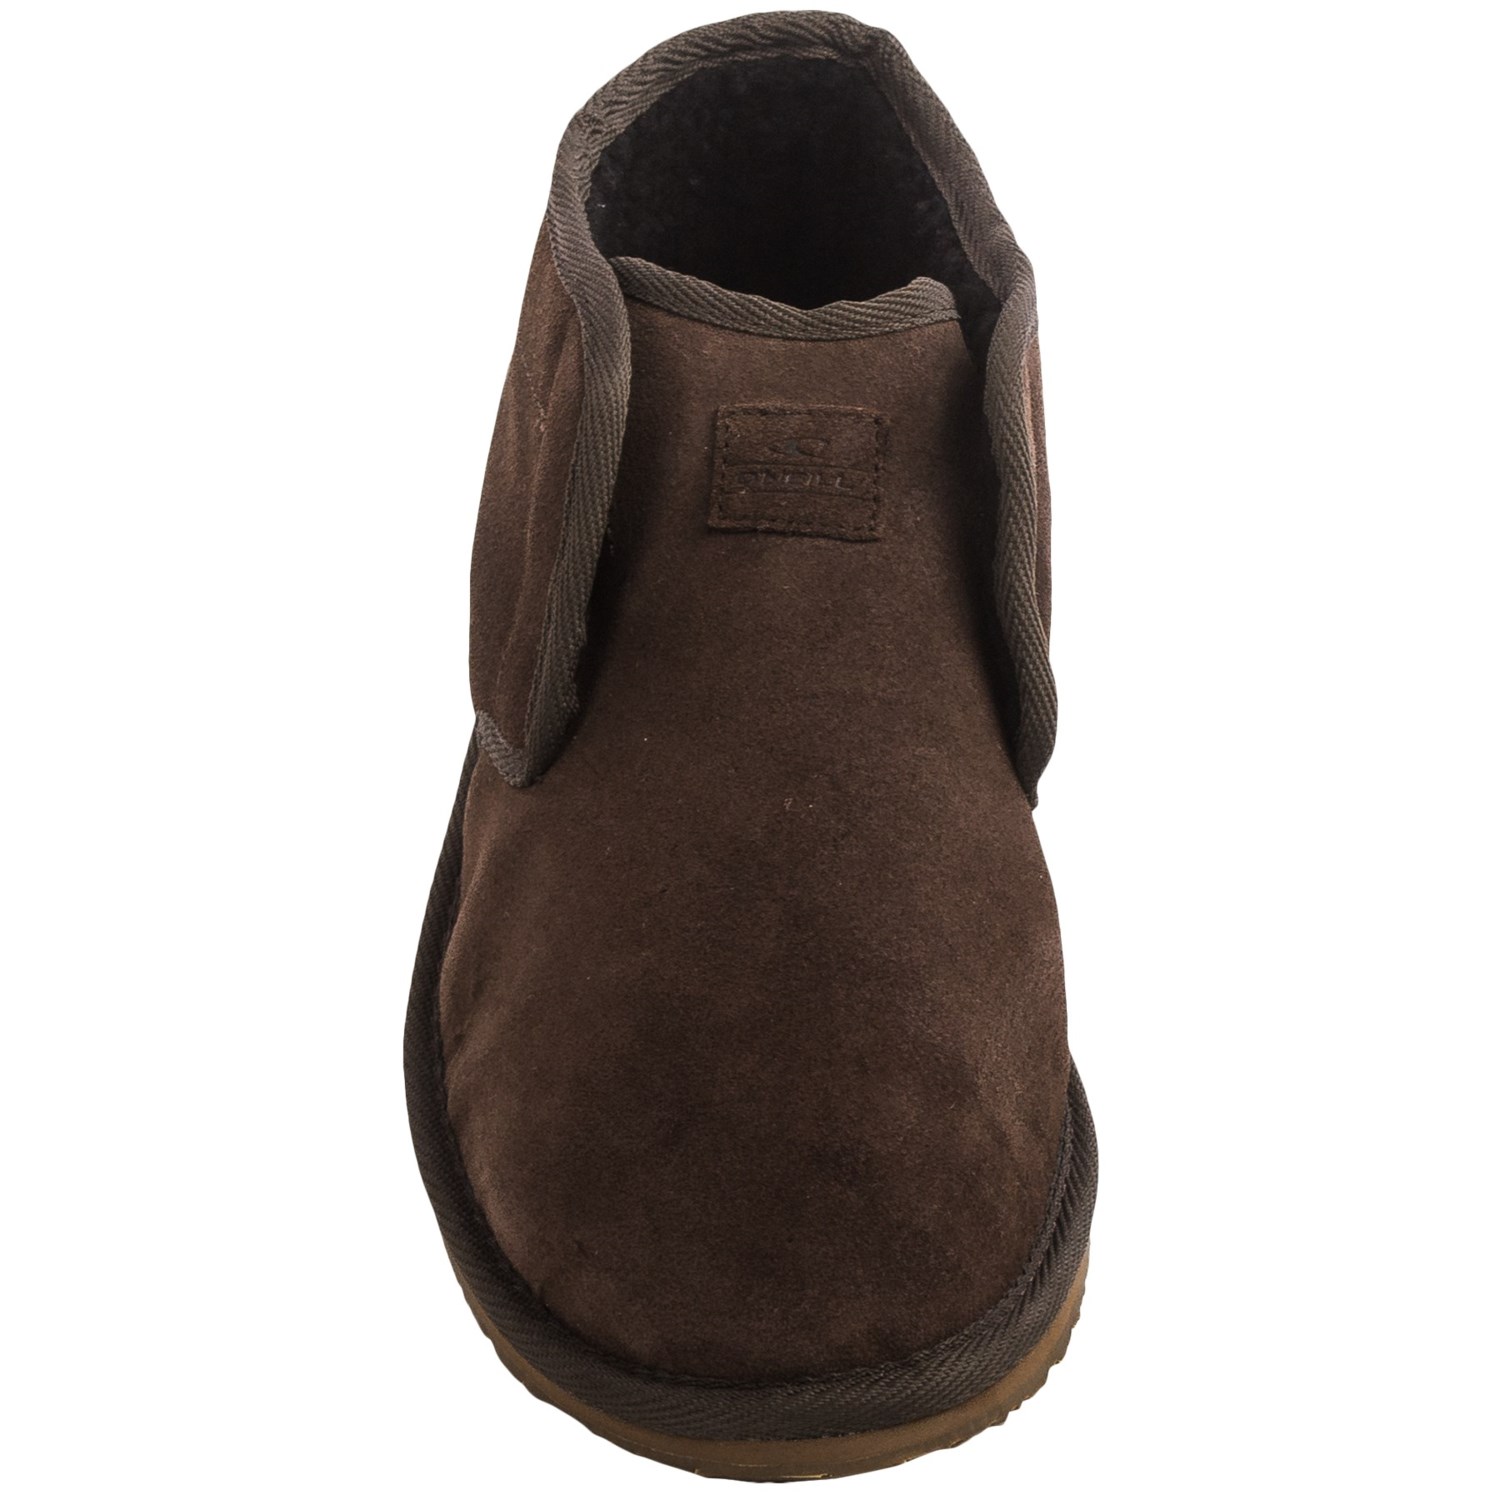 O’Neill Surf Turkey Suede Slippers (For Men) - Save 69%